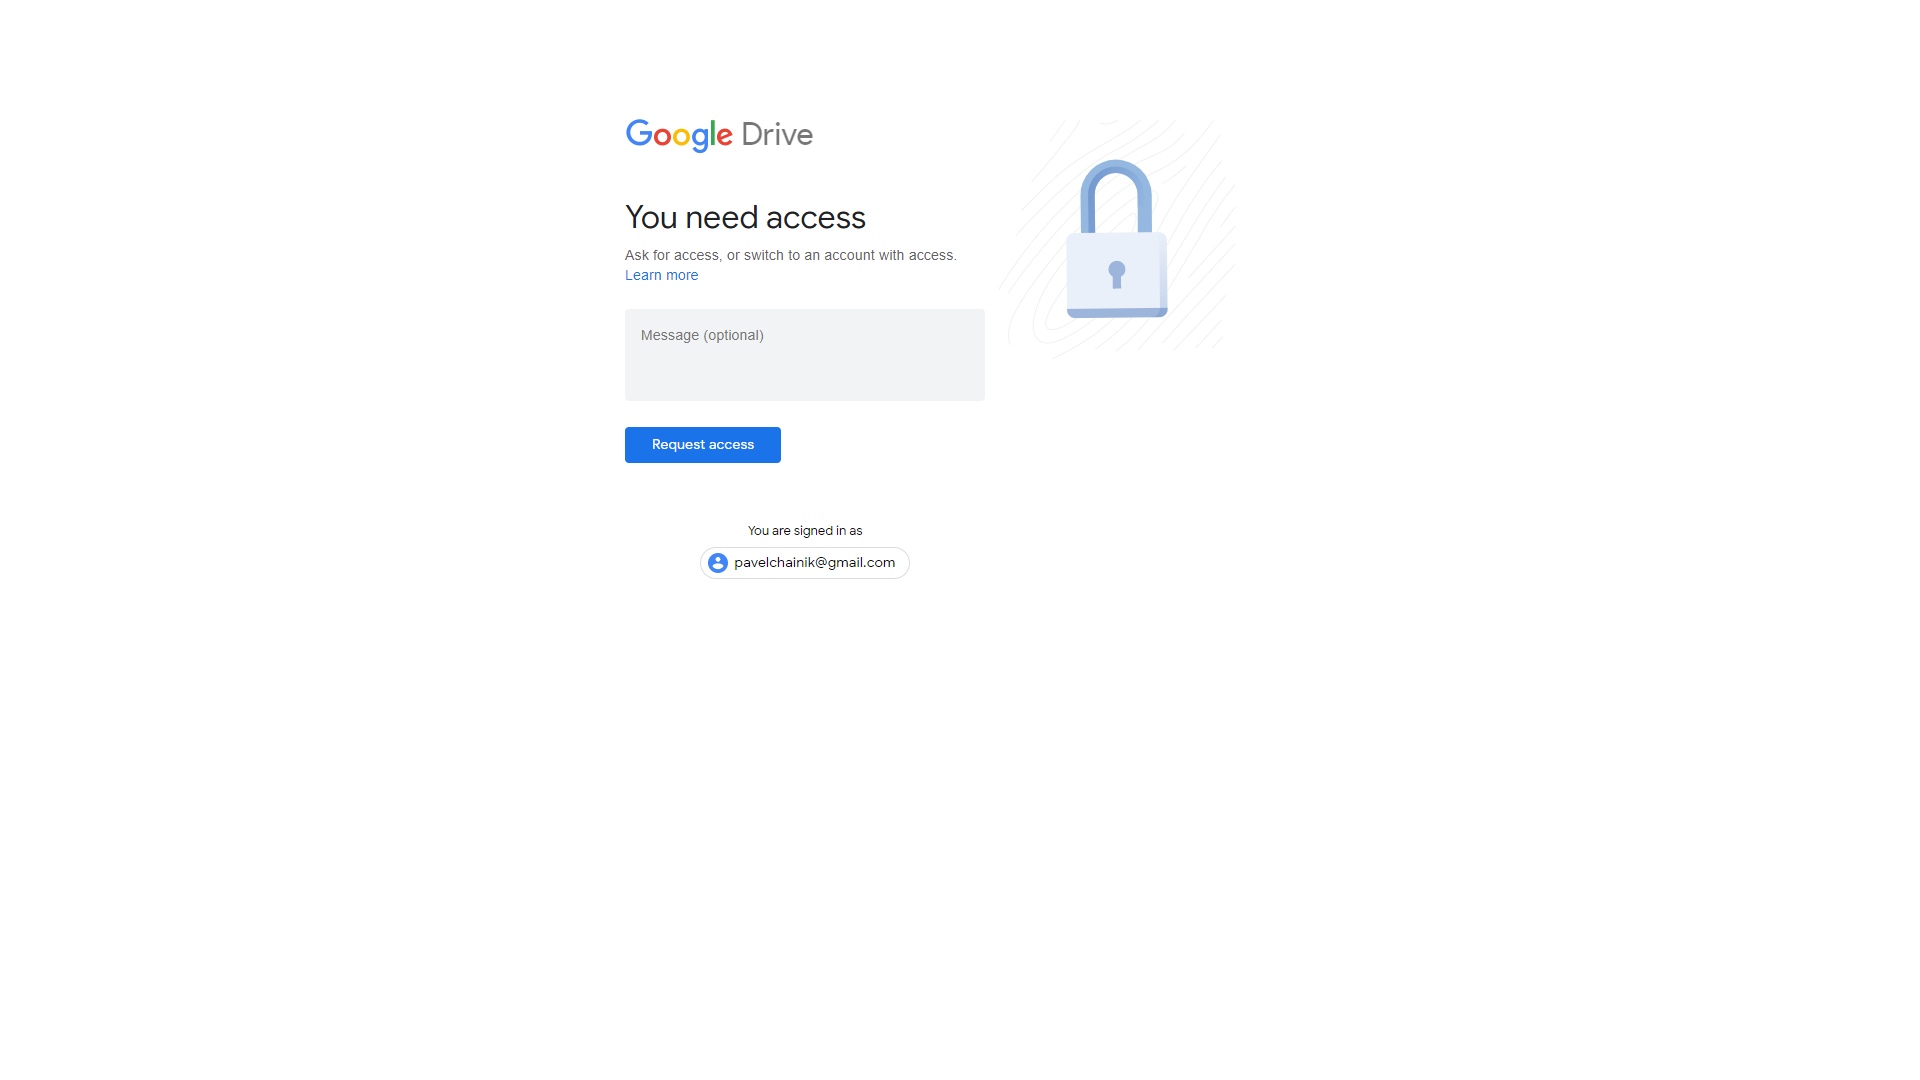 How to Log in to google drive 